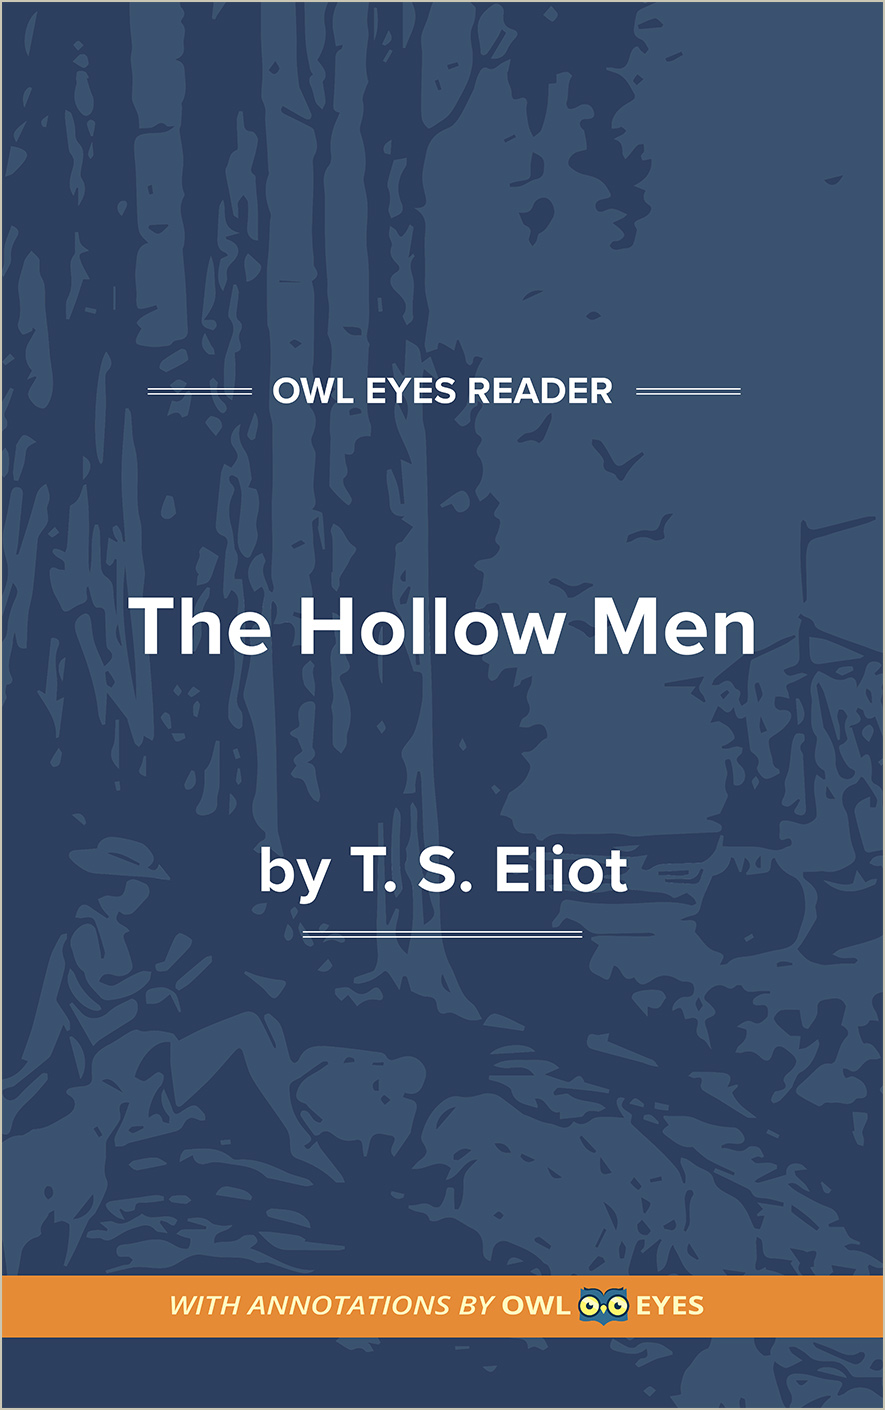 one paradox about the hollow men is that they are